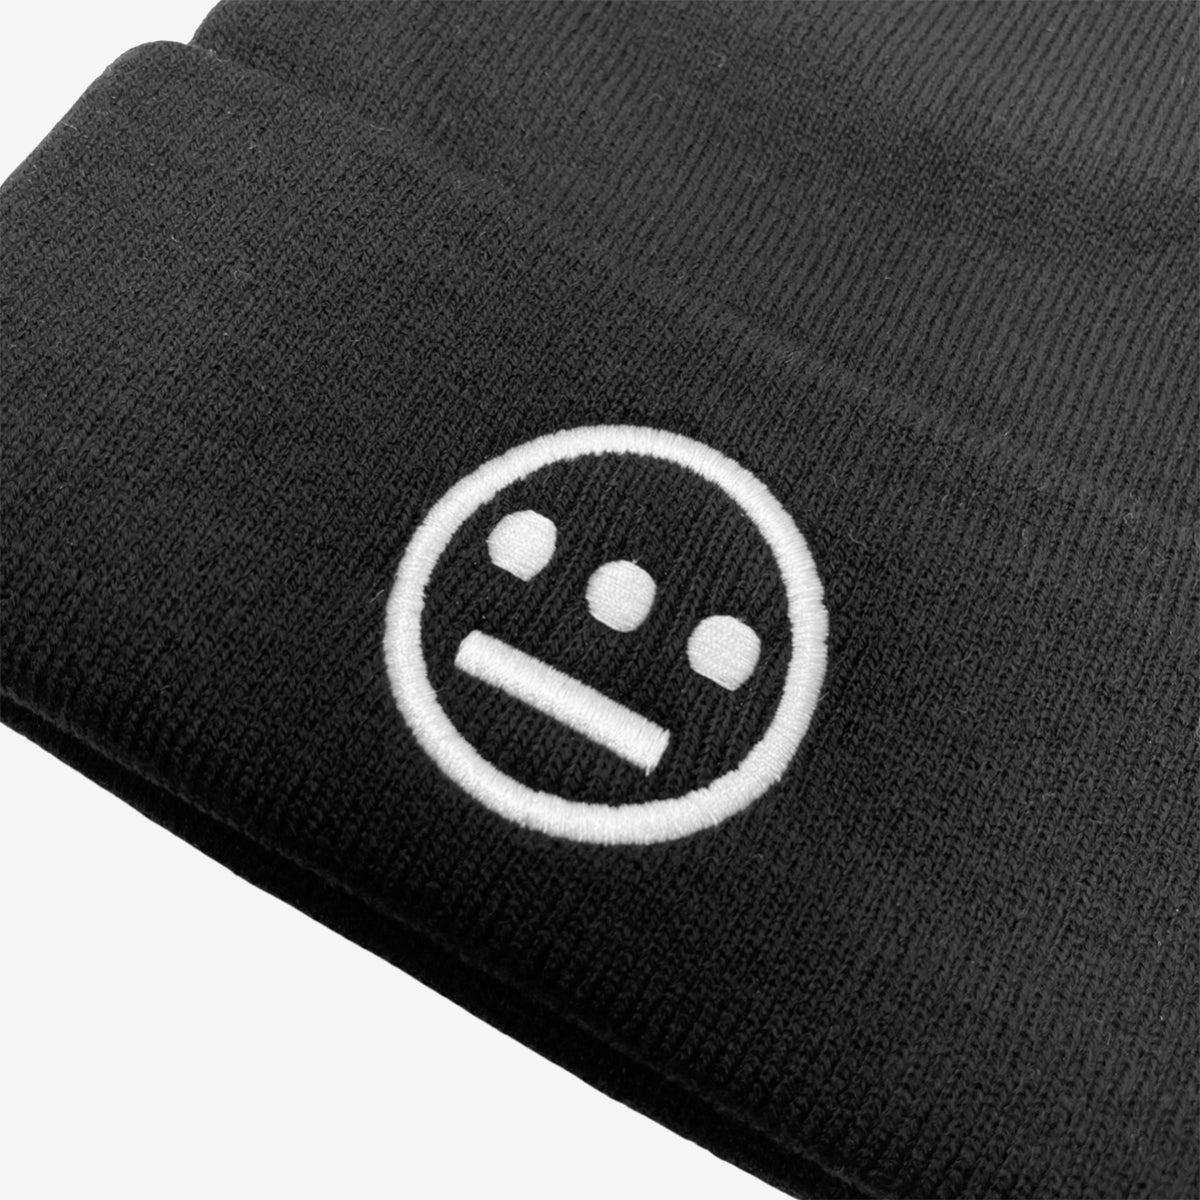 Close-up of white embroidered Hieroglyphics hip hop logo on front cuff of a black beanie.